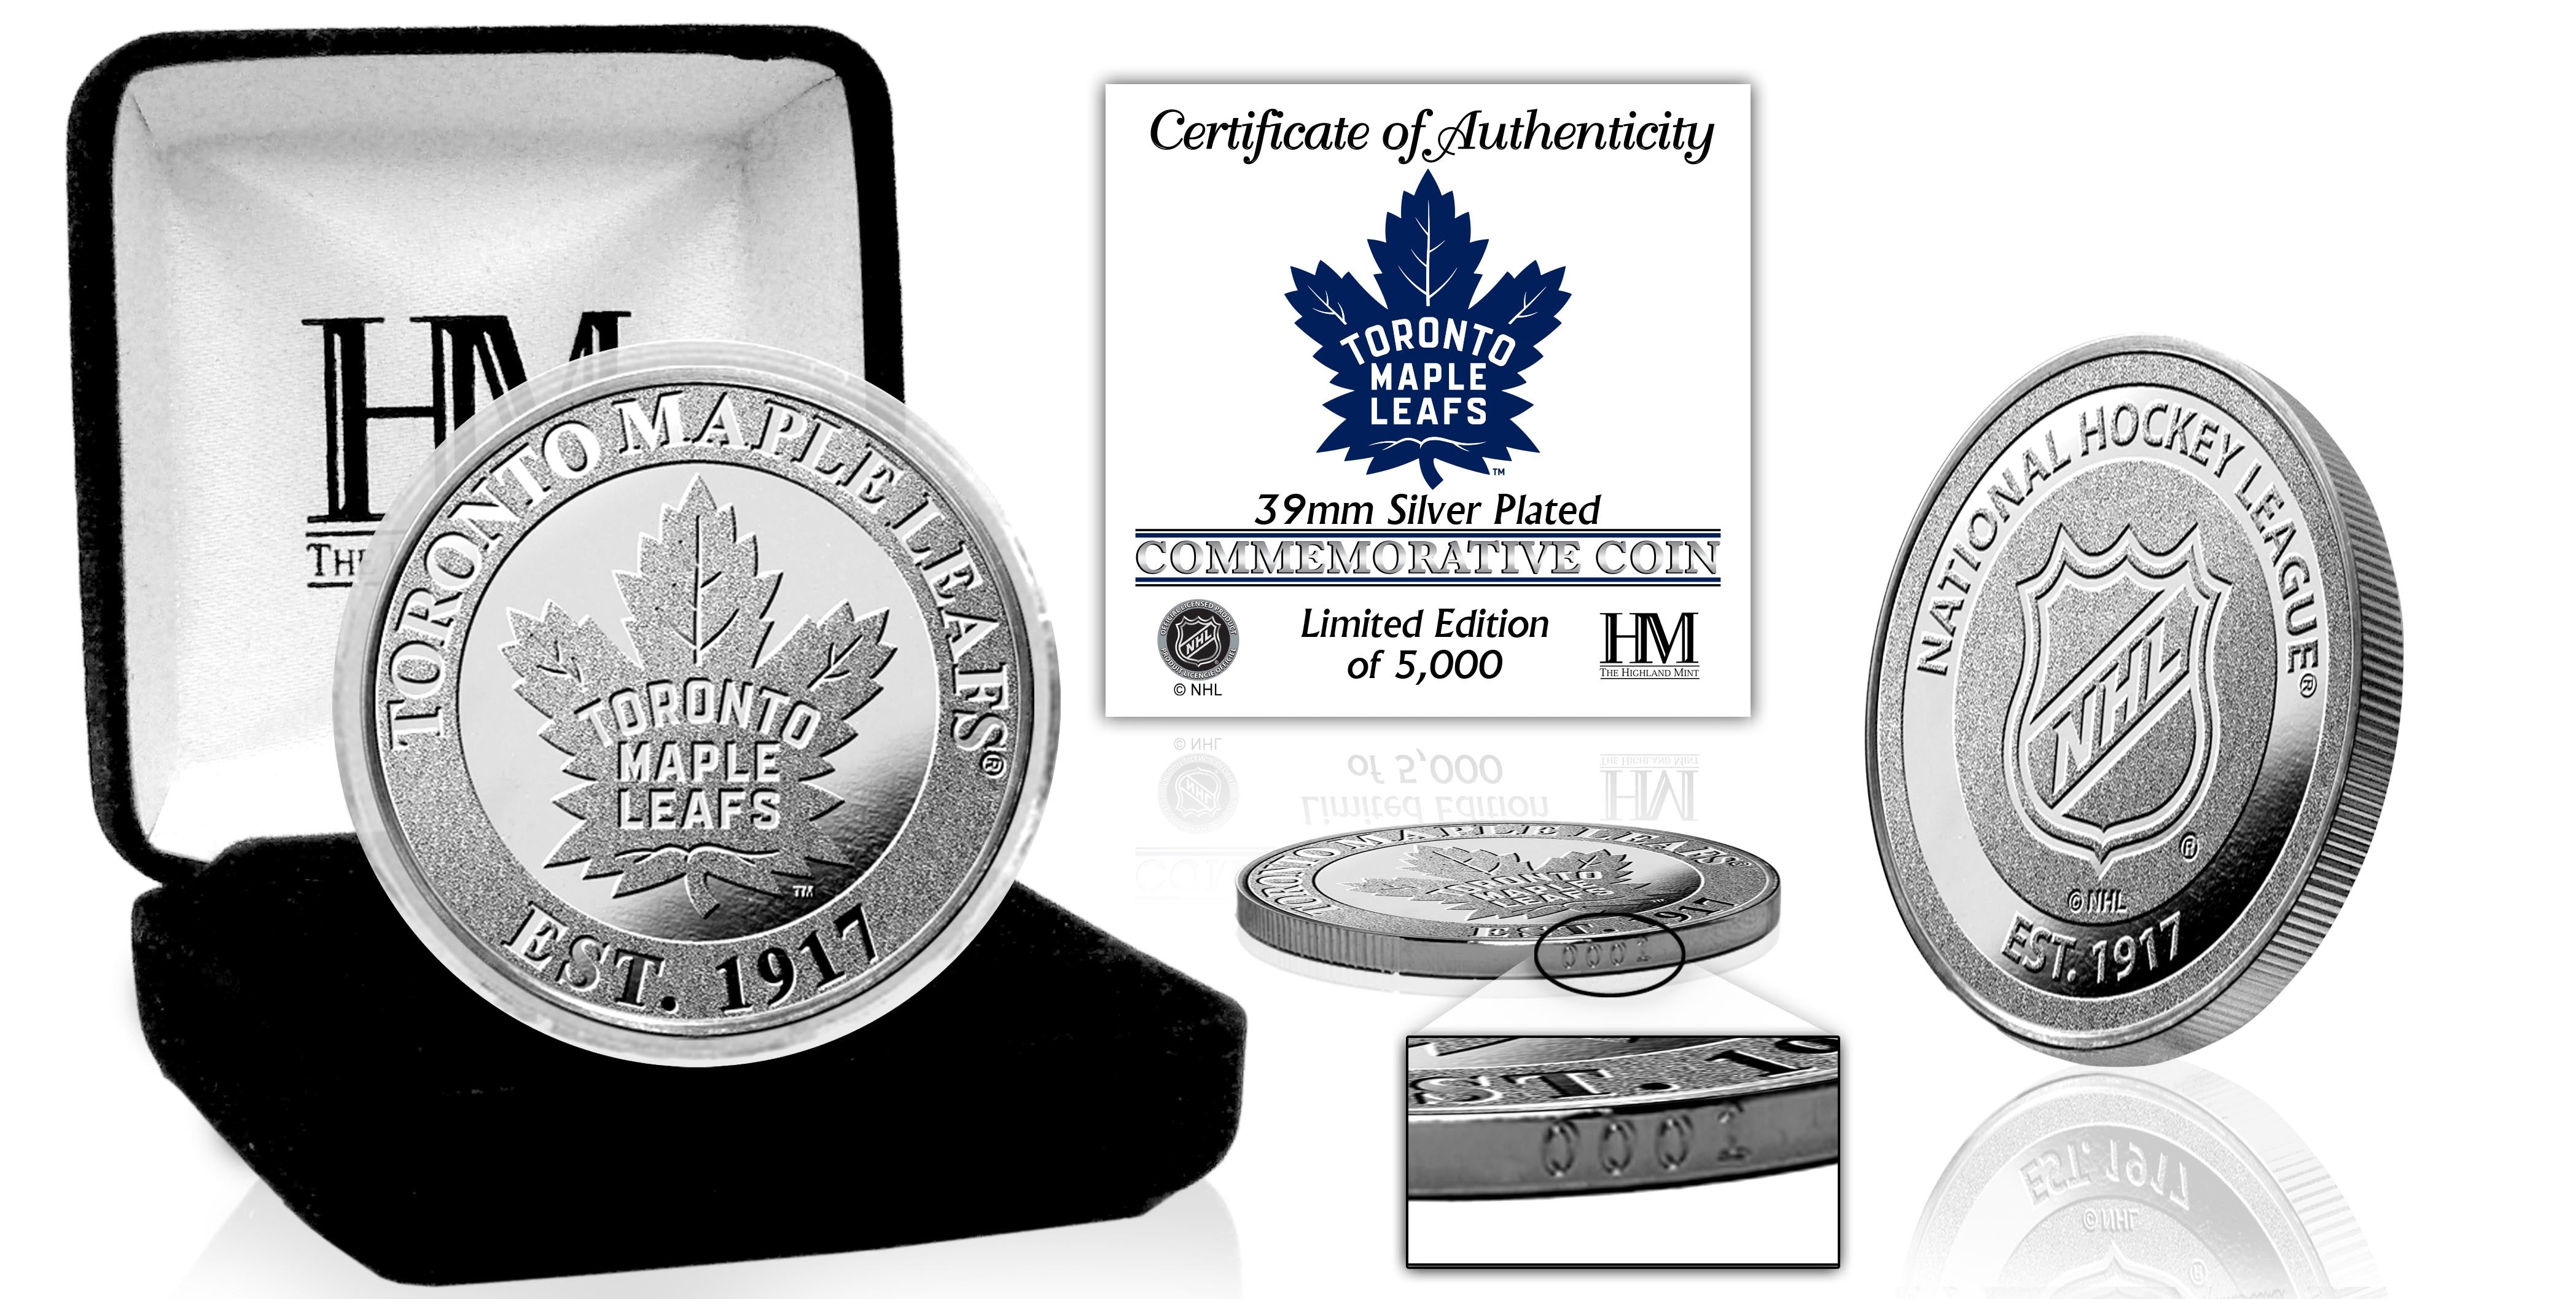 Toronto Maple Leafs Silver Mint Coin